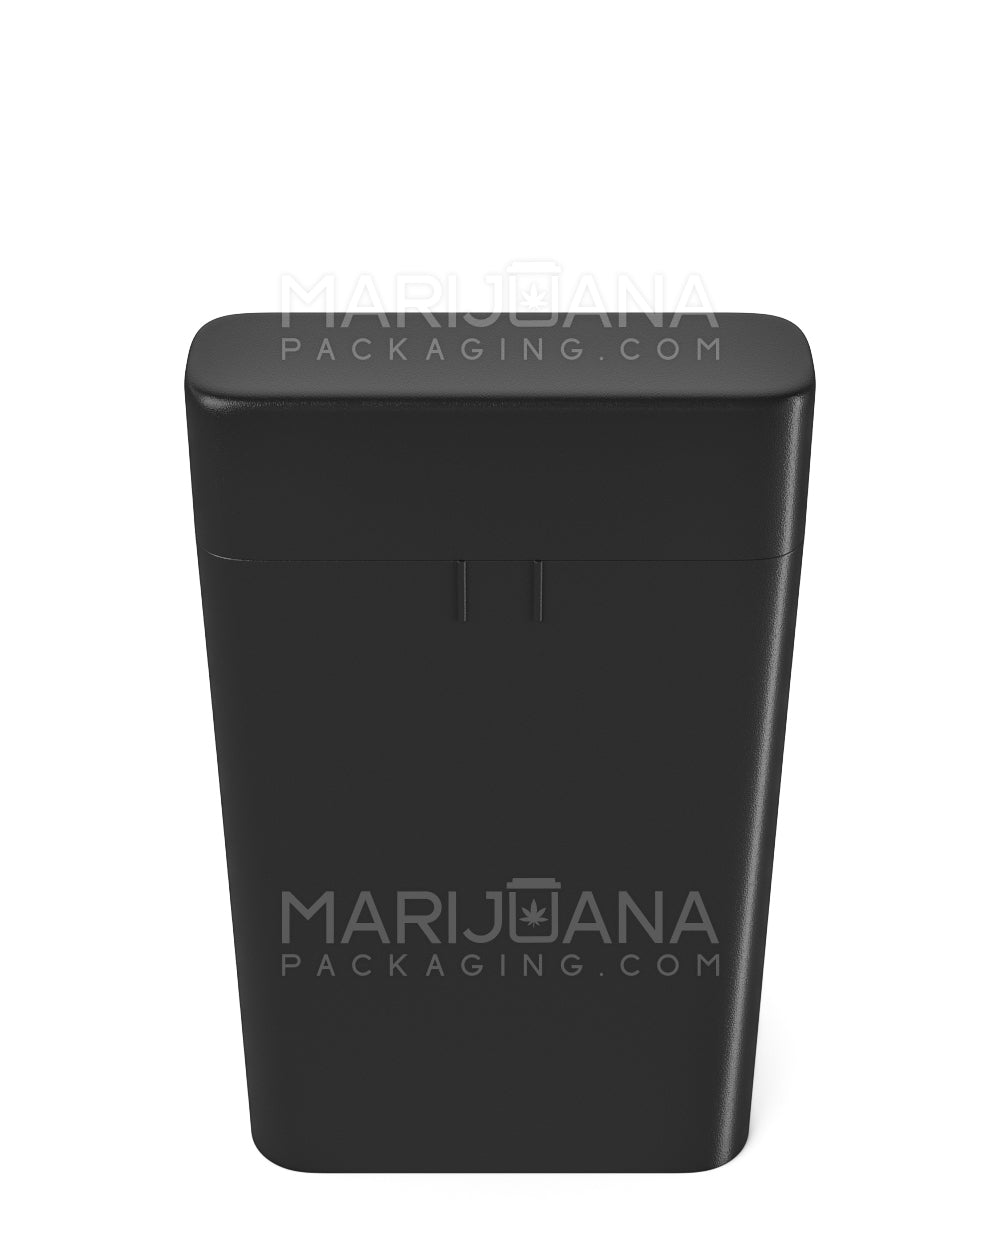 Child-Proof Joint / Blunt Tube Container Black 116mm - THC (Toronto Hemp  Company)